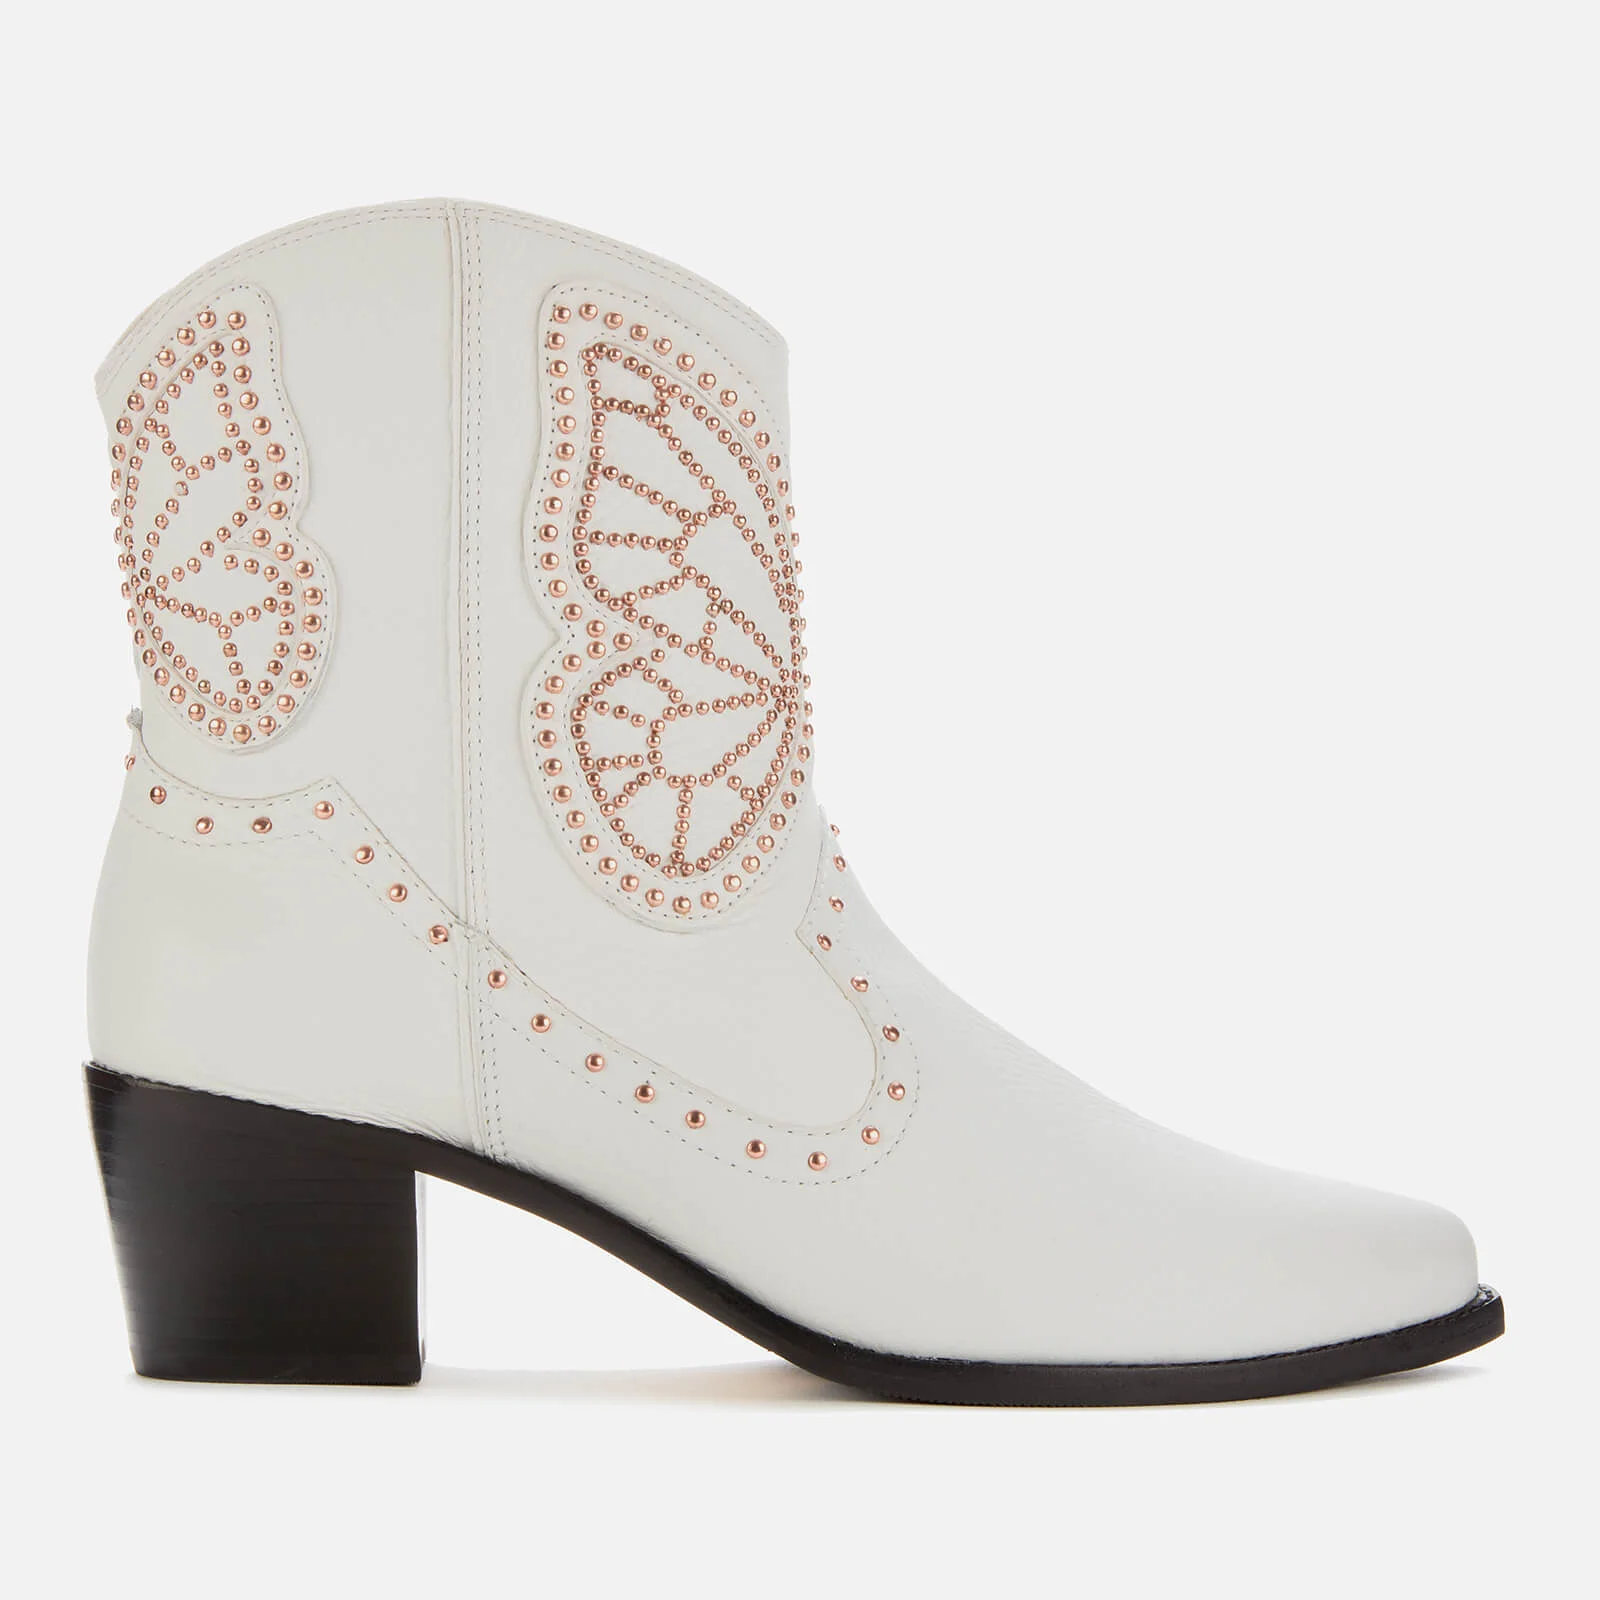 Sophia Webster Women's Shelby Cowboy Boots - White/Rose Gold Image 1